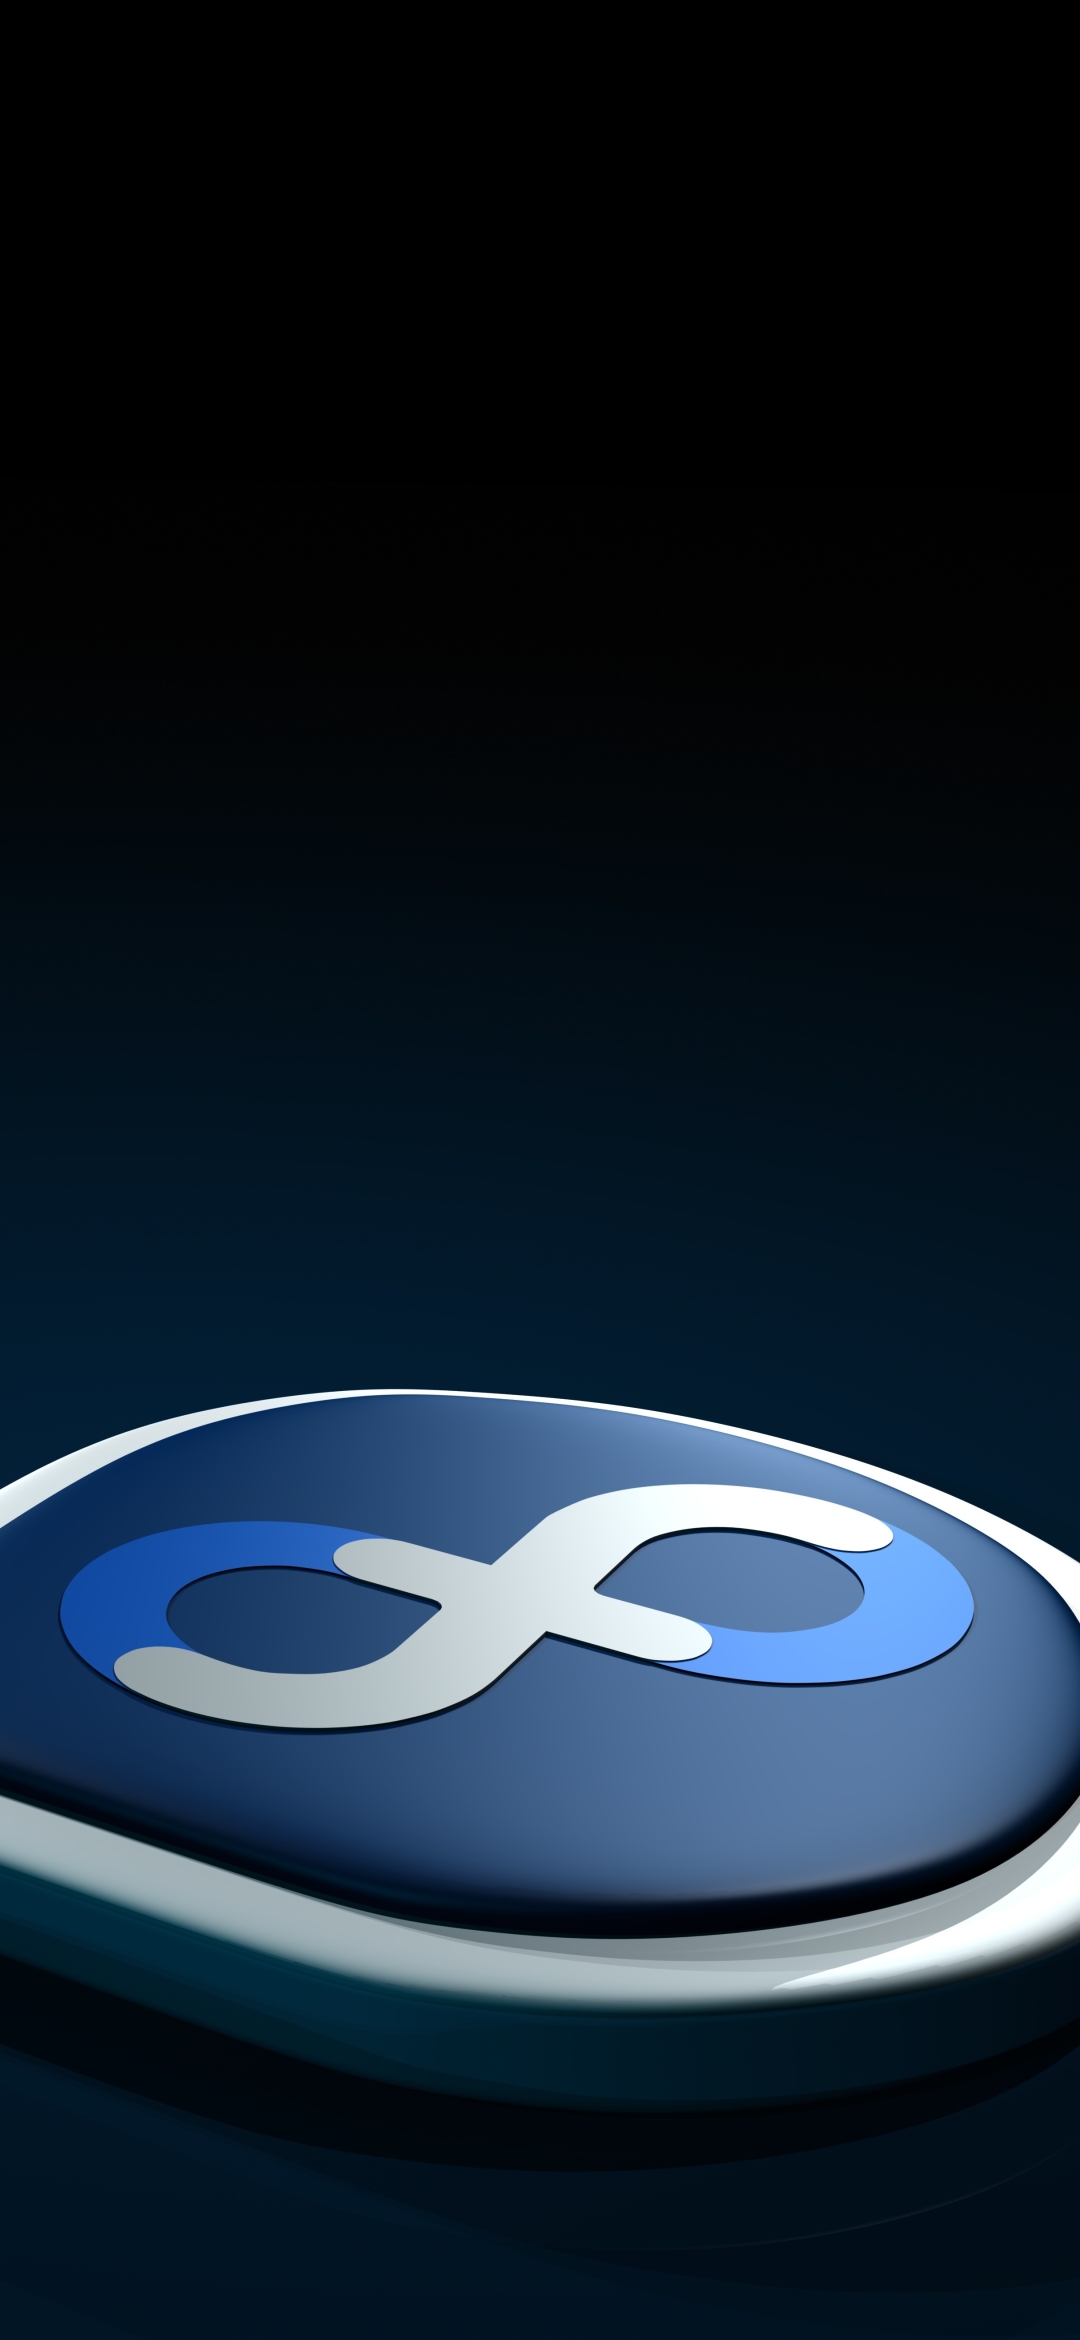 Fedora Phone Wallpaper - Mobile Abyss